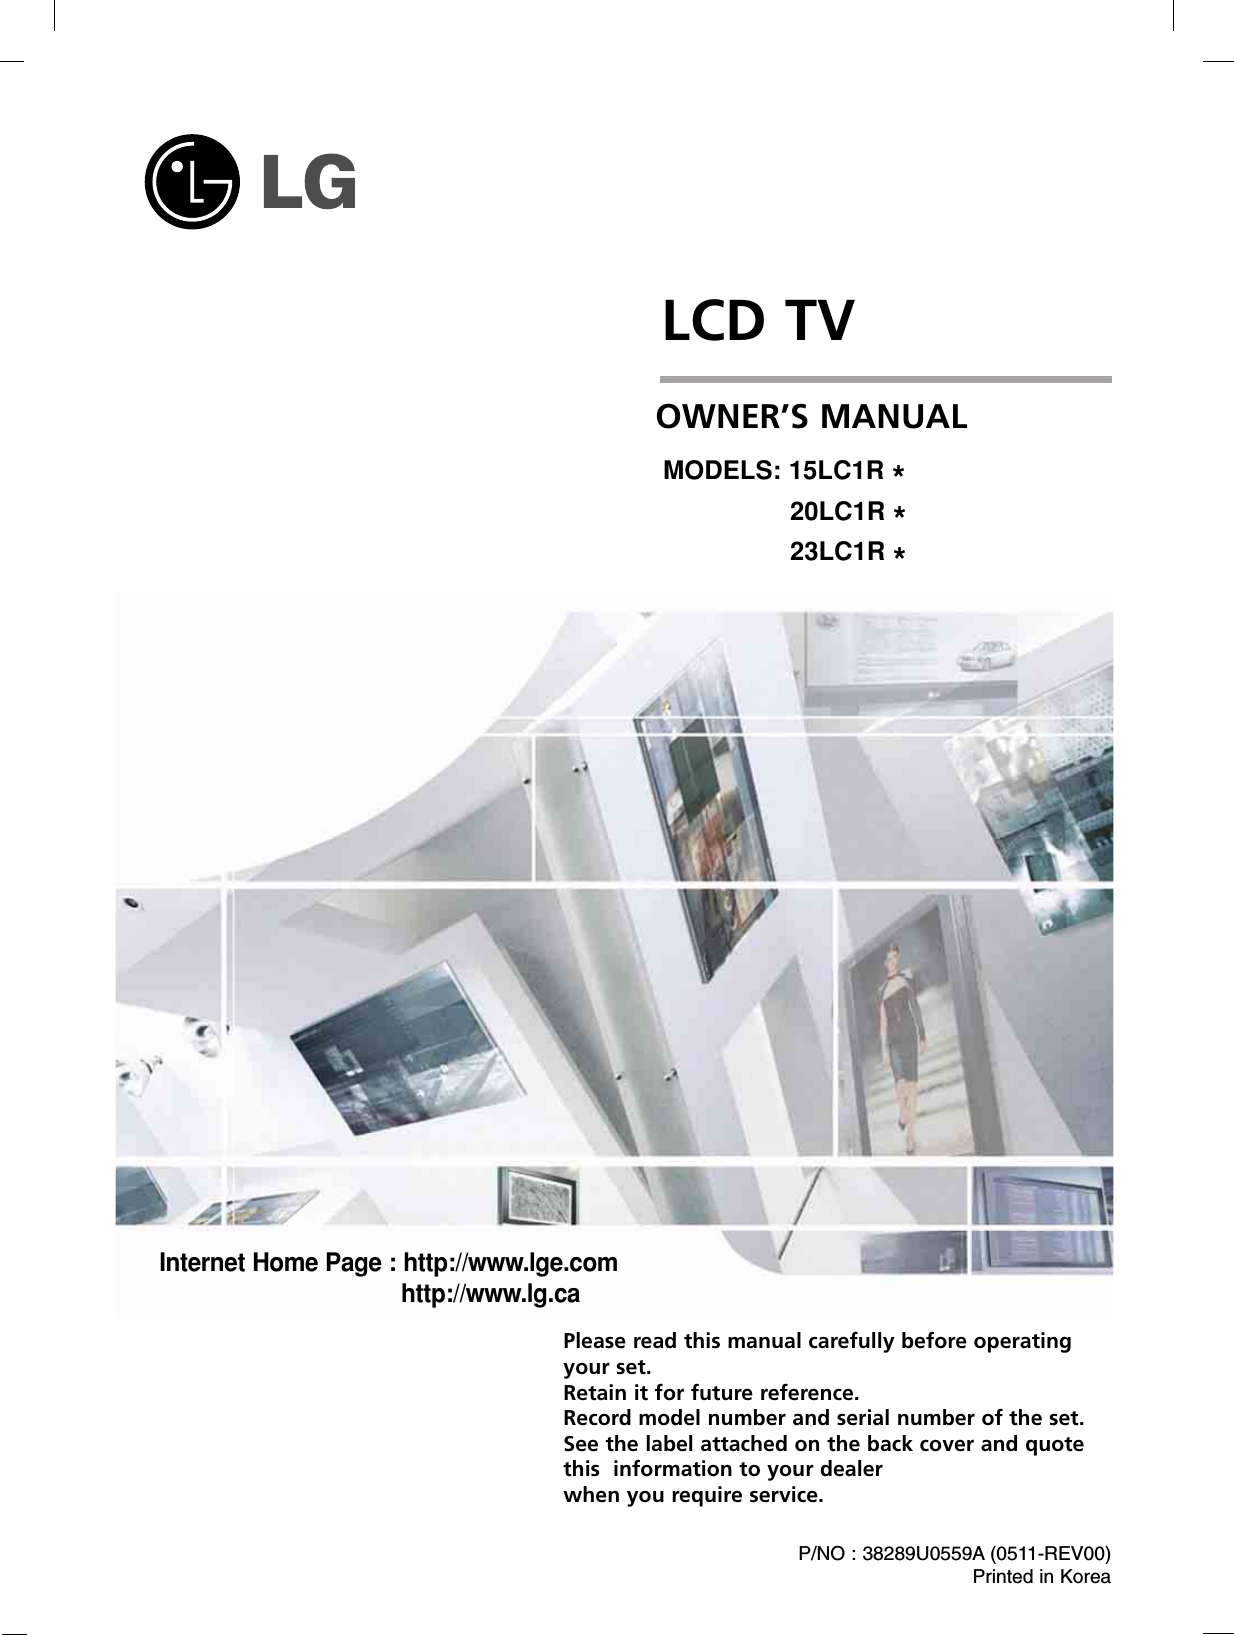 LCD TVPlease read this manual carefully before operatingyour set. Retain it for future reference.Record model number and serial number of the set. See the label attached on the back cover and quote this  information to your dealer when you require service.P/NO : 38289U0559A (0511-REV00)Printed in KoreaOWNER’S MANUALMODELS: 15LC1R *20LC1R *23LC1R *Internet Home Page : http://www.lge.comhttp://www.lg.ca